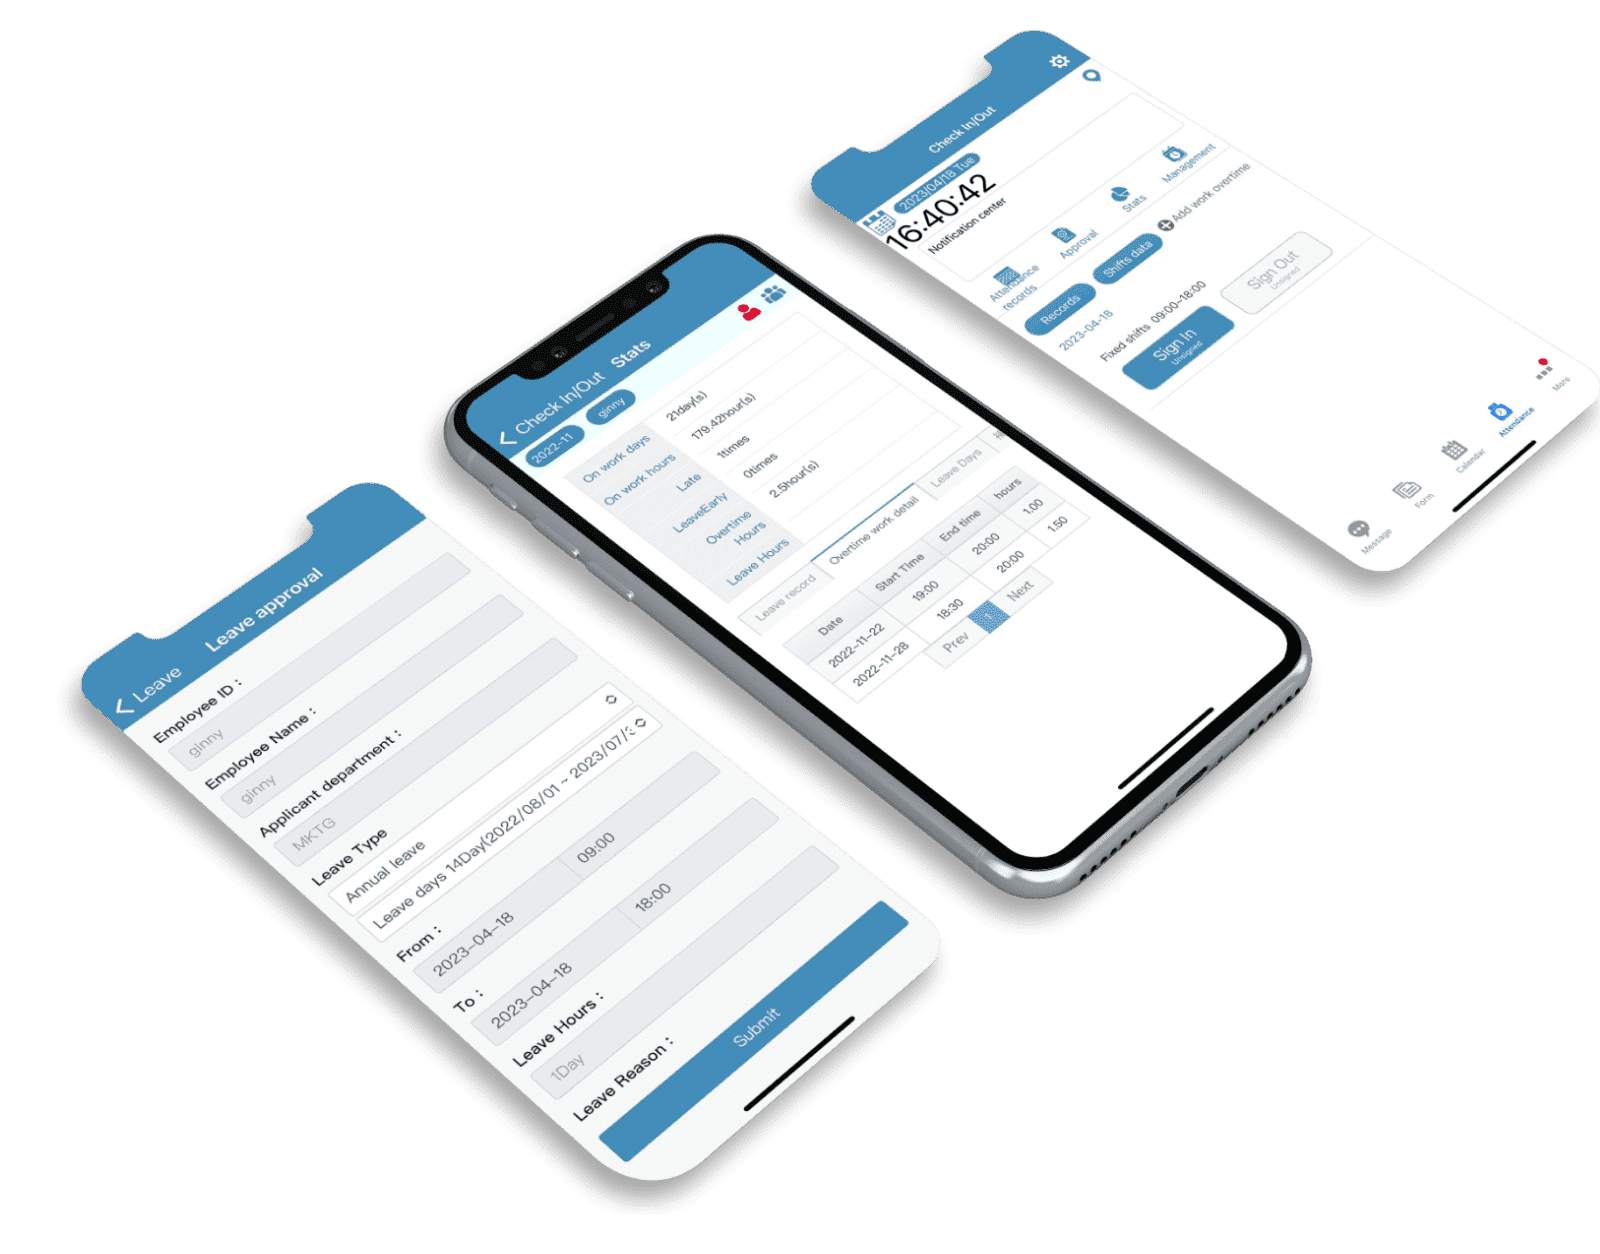 ServiceJDC - Punch-in app, leave and overtime approval